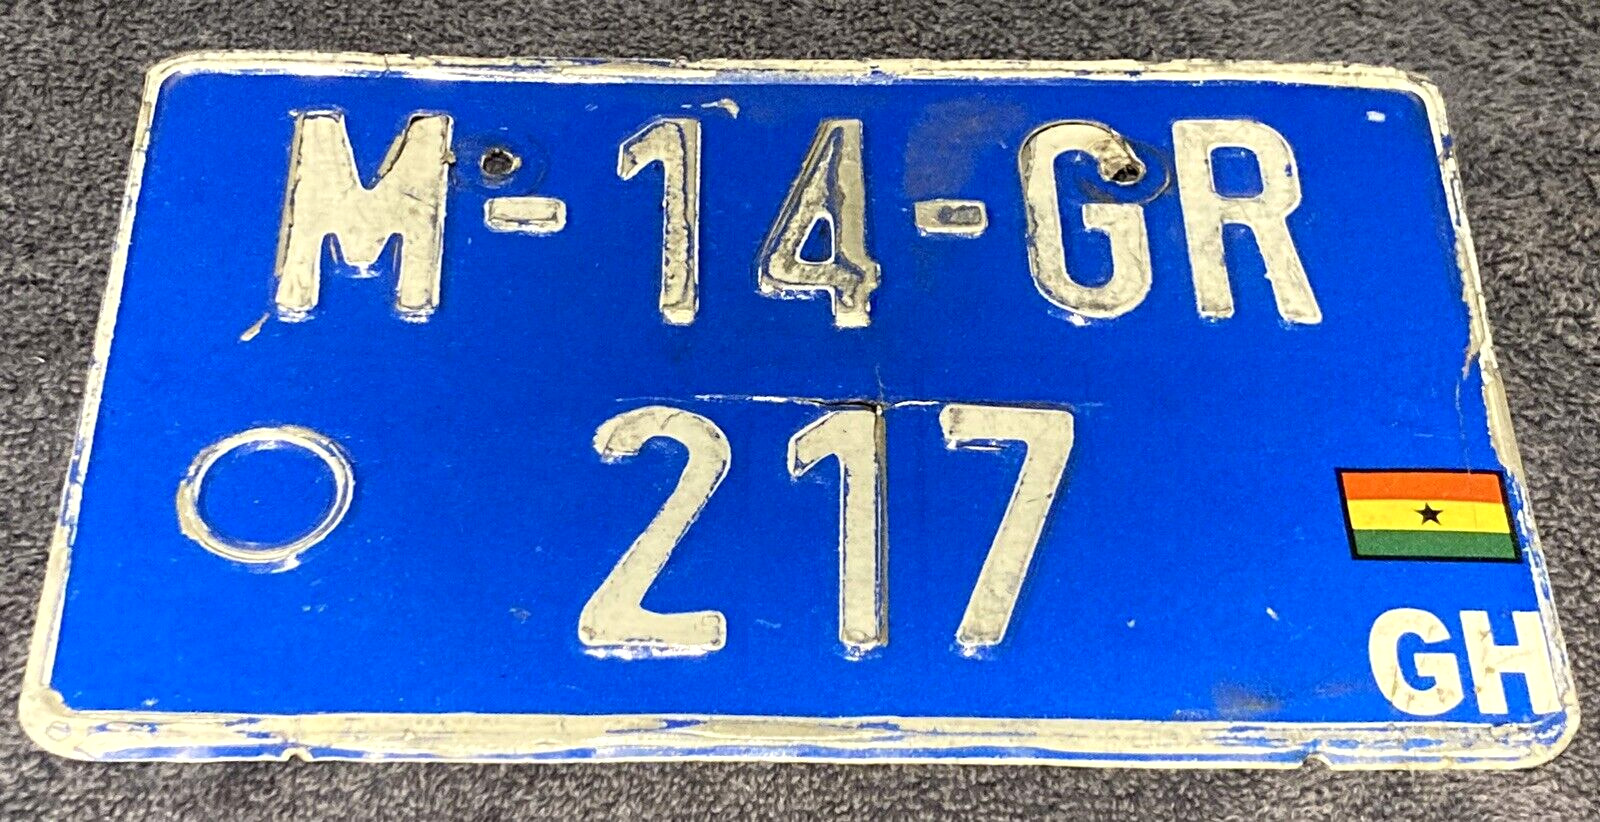 Ghana Africa MOTORCYCLE license plate w/flag M 14 GR 217 Foreign tag African MC